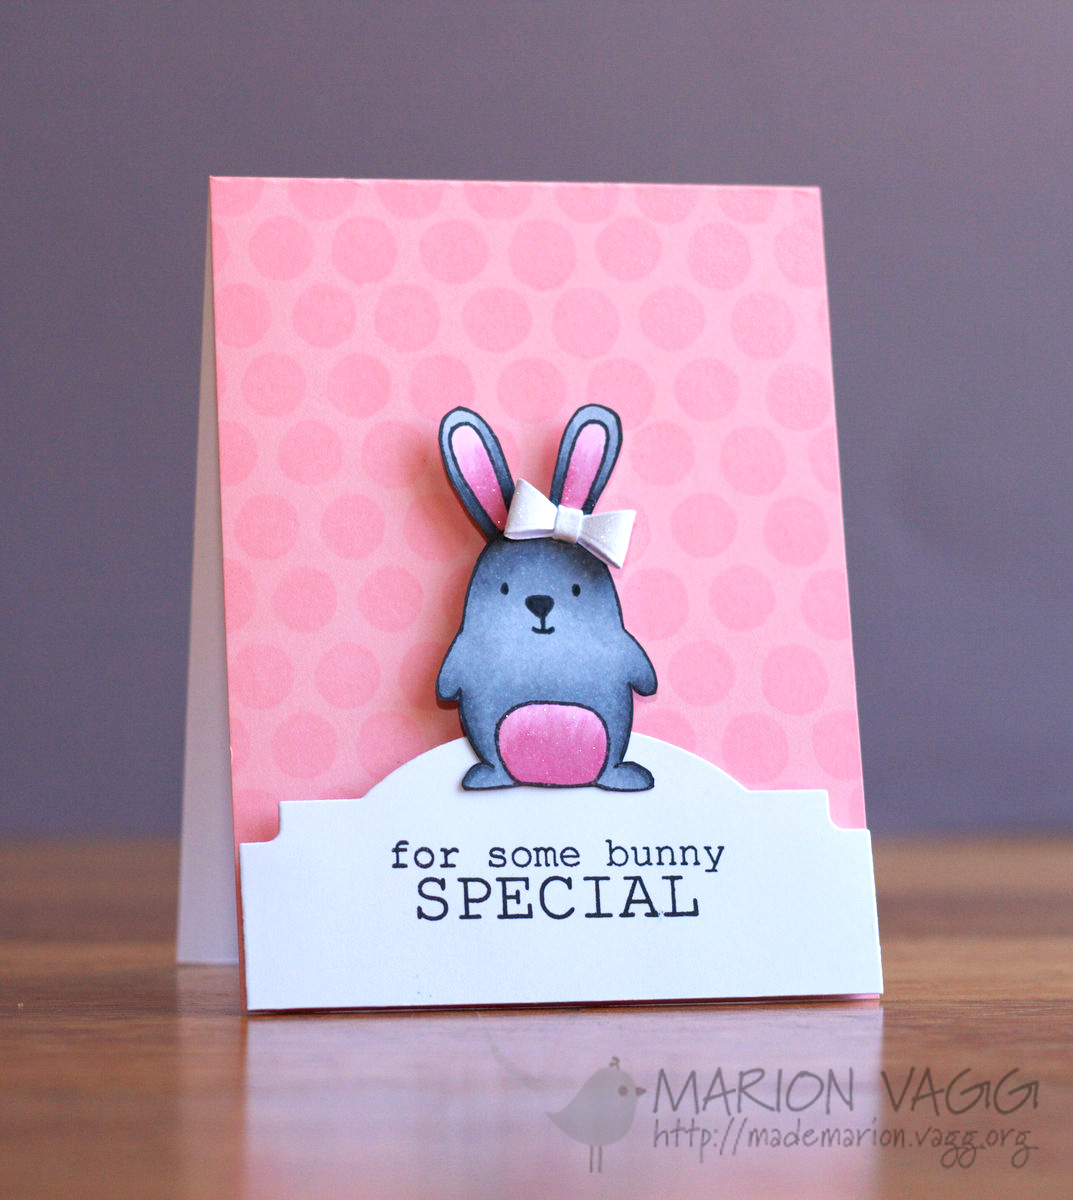 Some Bunny Special | Marion Vagg